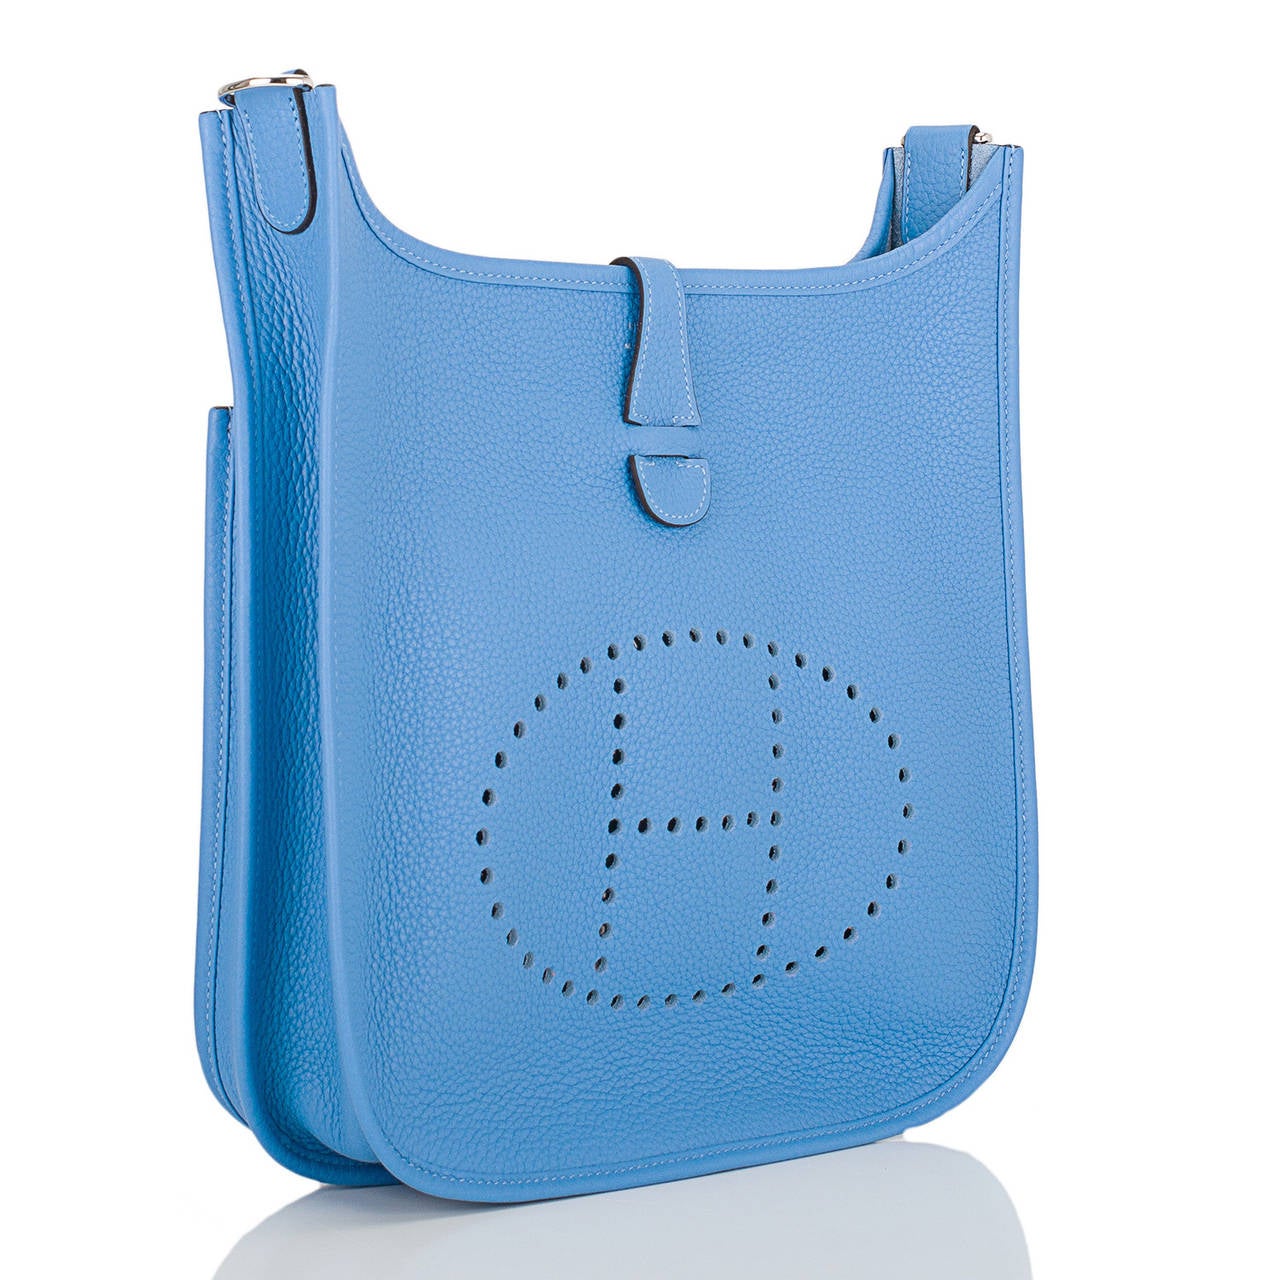 Hermes Blue Paradise Evelyne III PM in clemence leather with palladium hardware.

This Evelyne III is made in one of the most in demand colors -- Blue Paradise, a newly introduced color that is a lovely periwinkle blue. This bag is made in